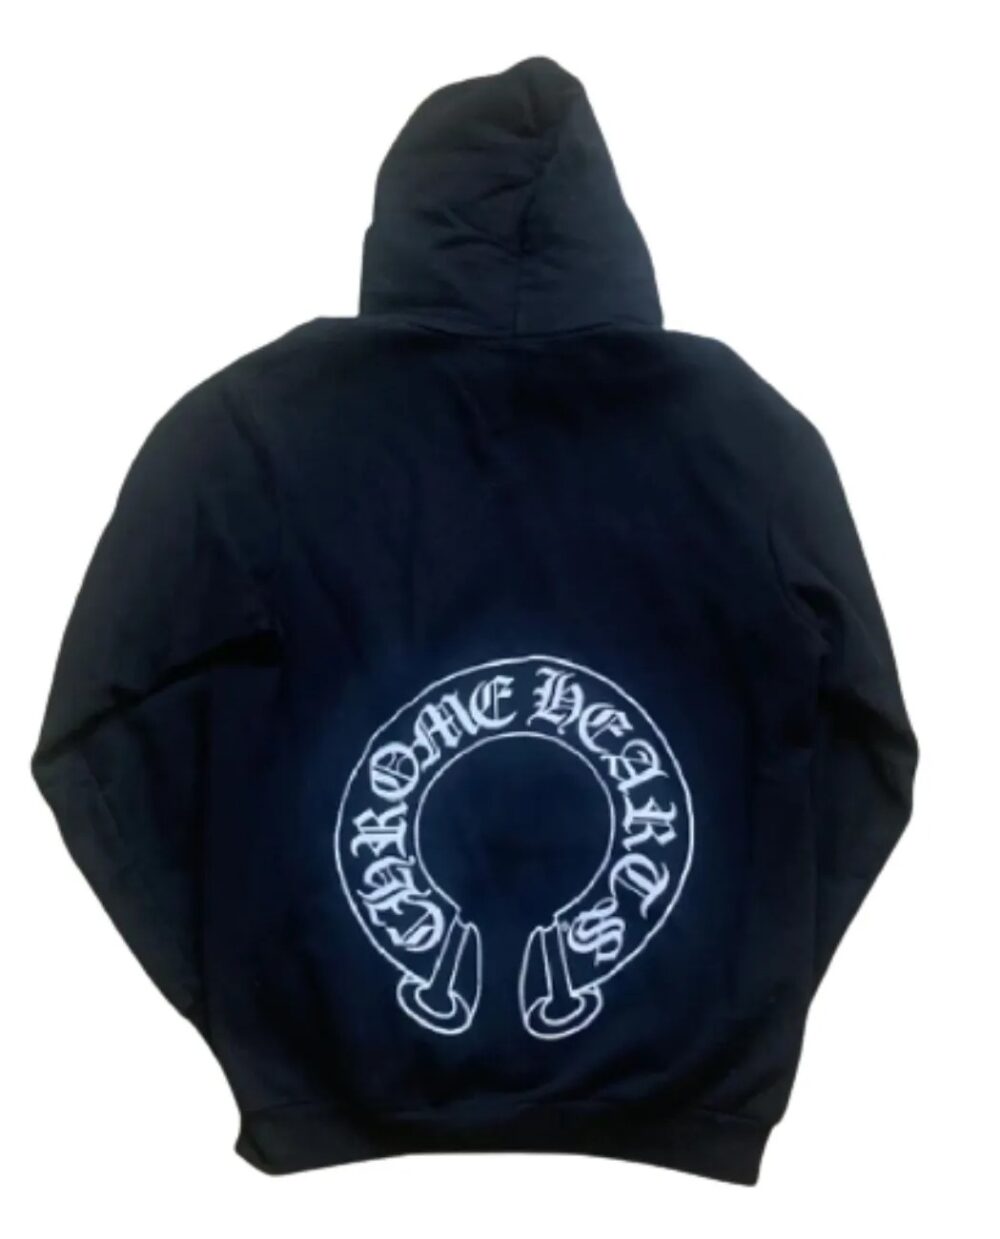 "Black Chrome Hearts Online Blue Exclusive Hoodie featuring the iconic Chrome Hearts logo."